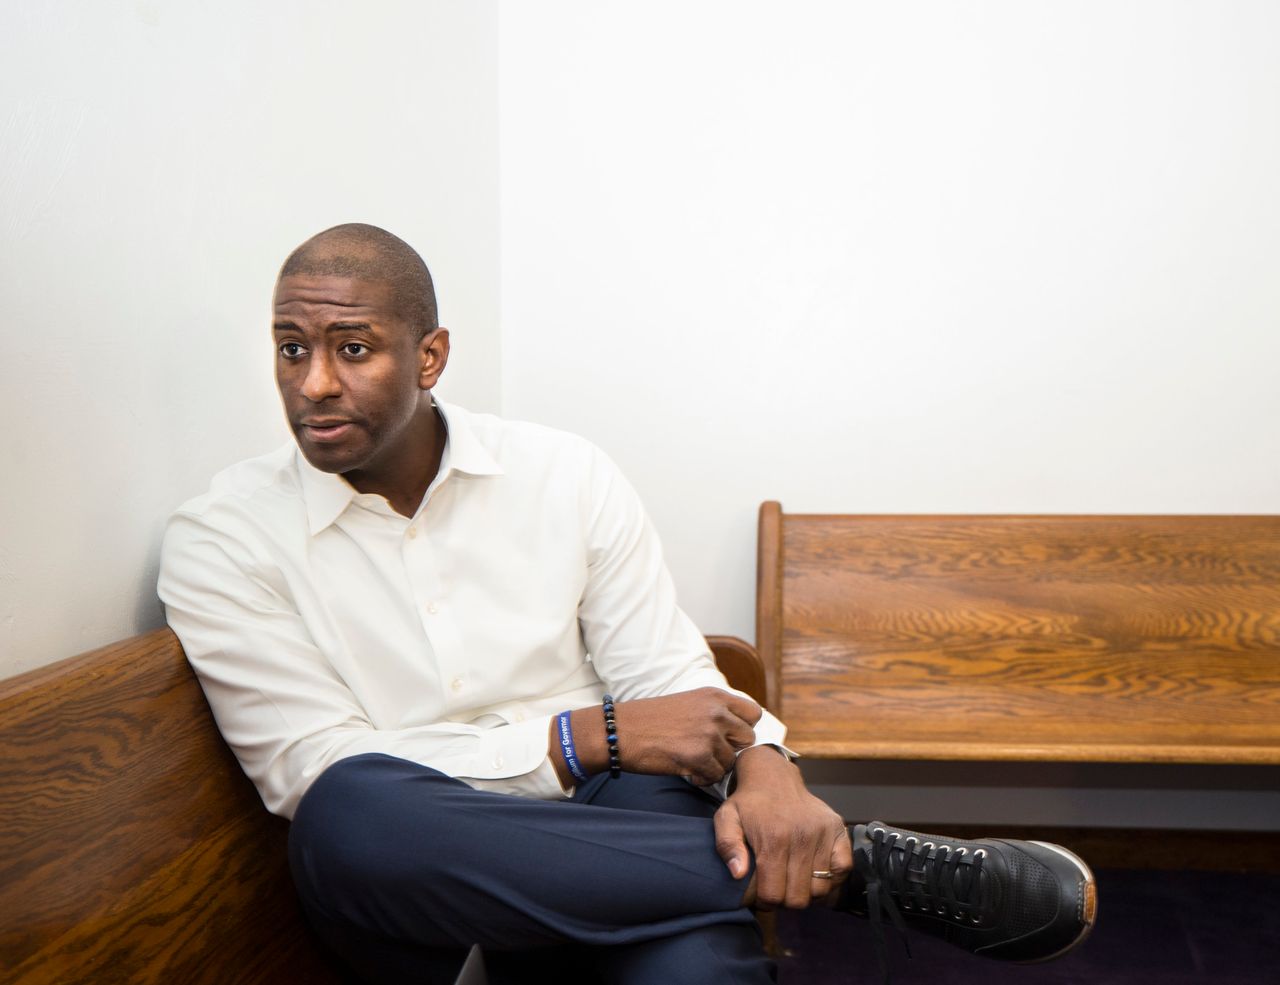 “I don’t think people are looking for perfect. They’re looking for real,” says Gillum.